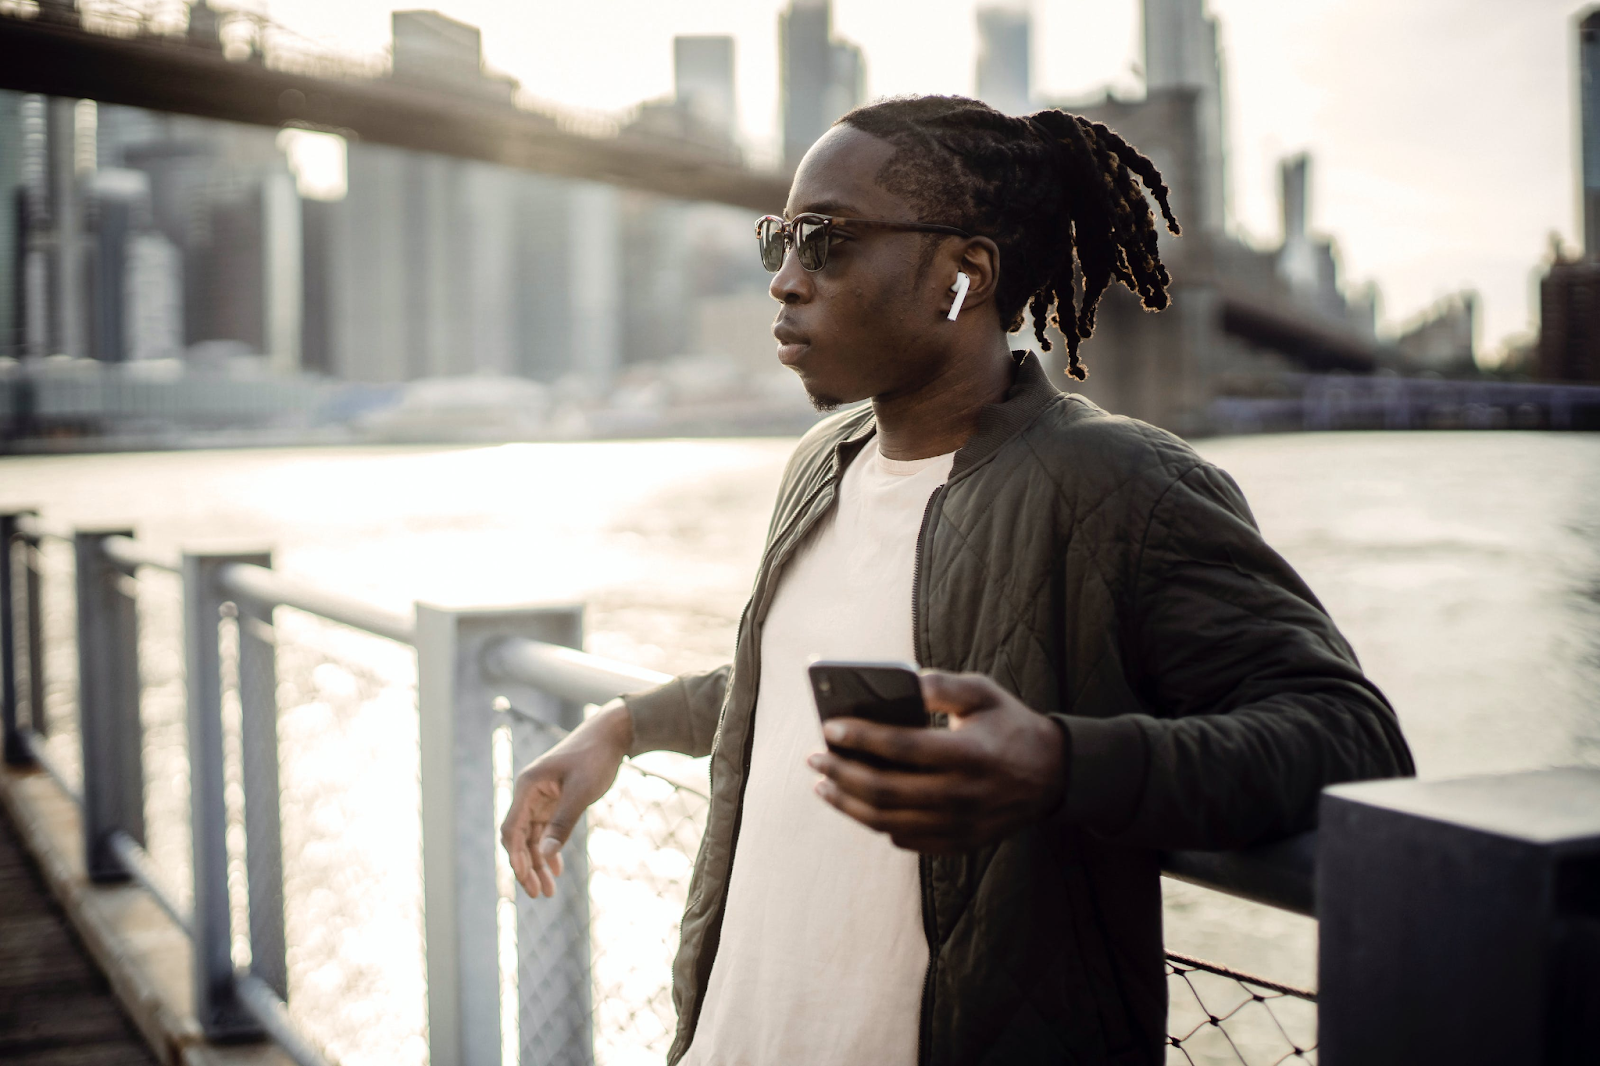 Well dressed black man with a dreadlock ponytail and sunglasses relaxing by a bridge port.